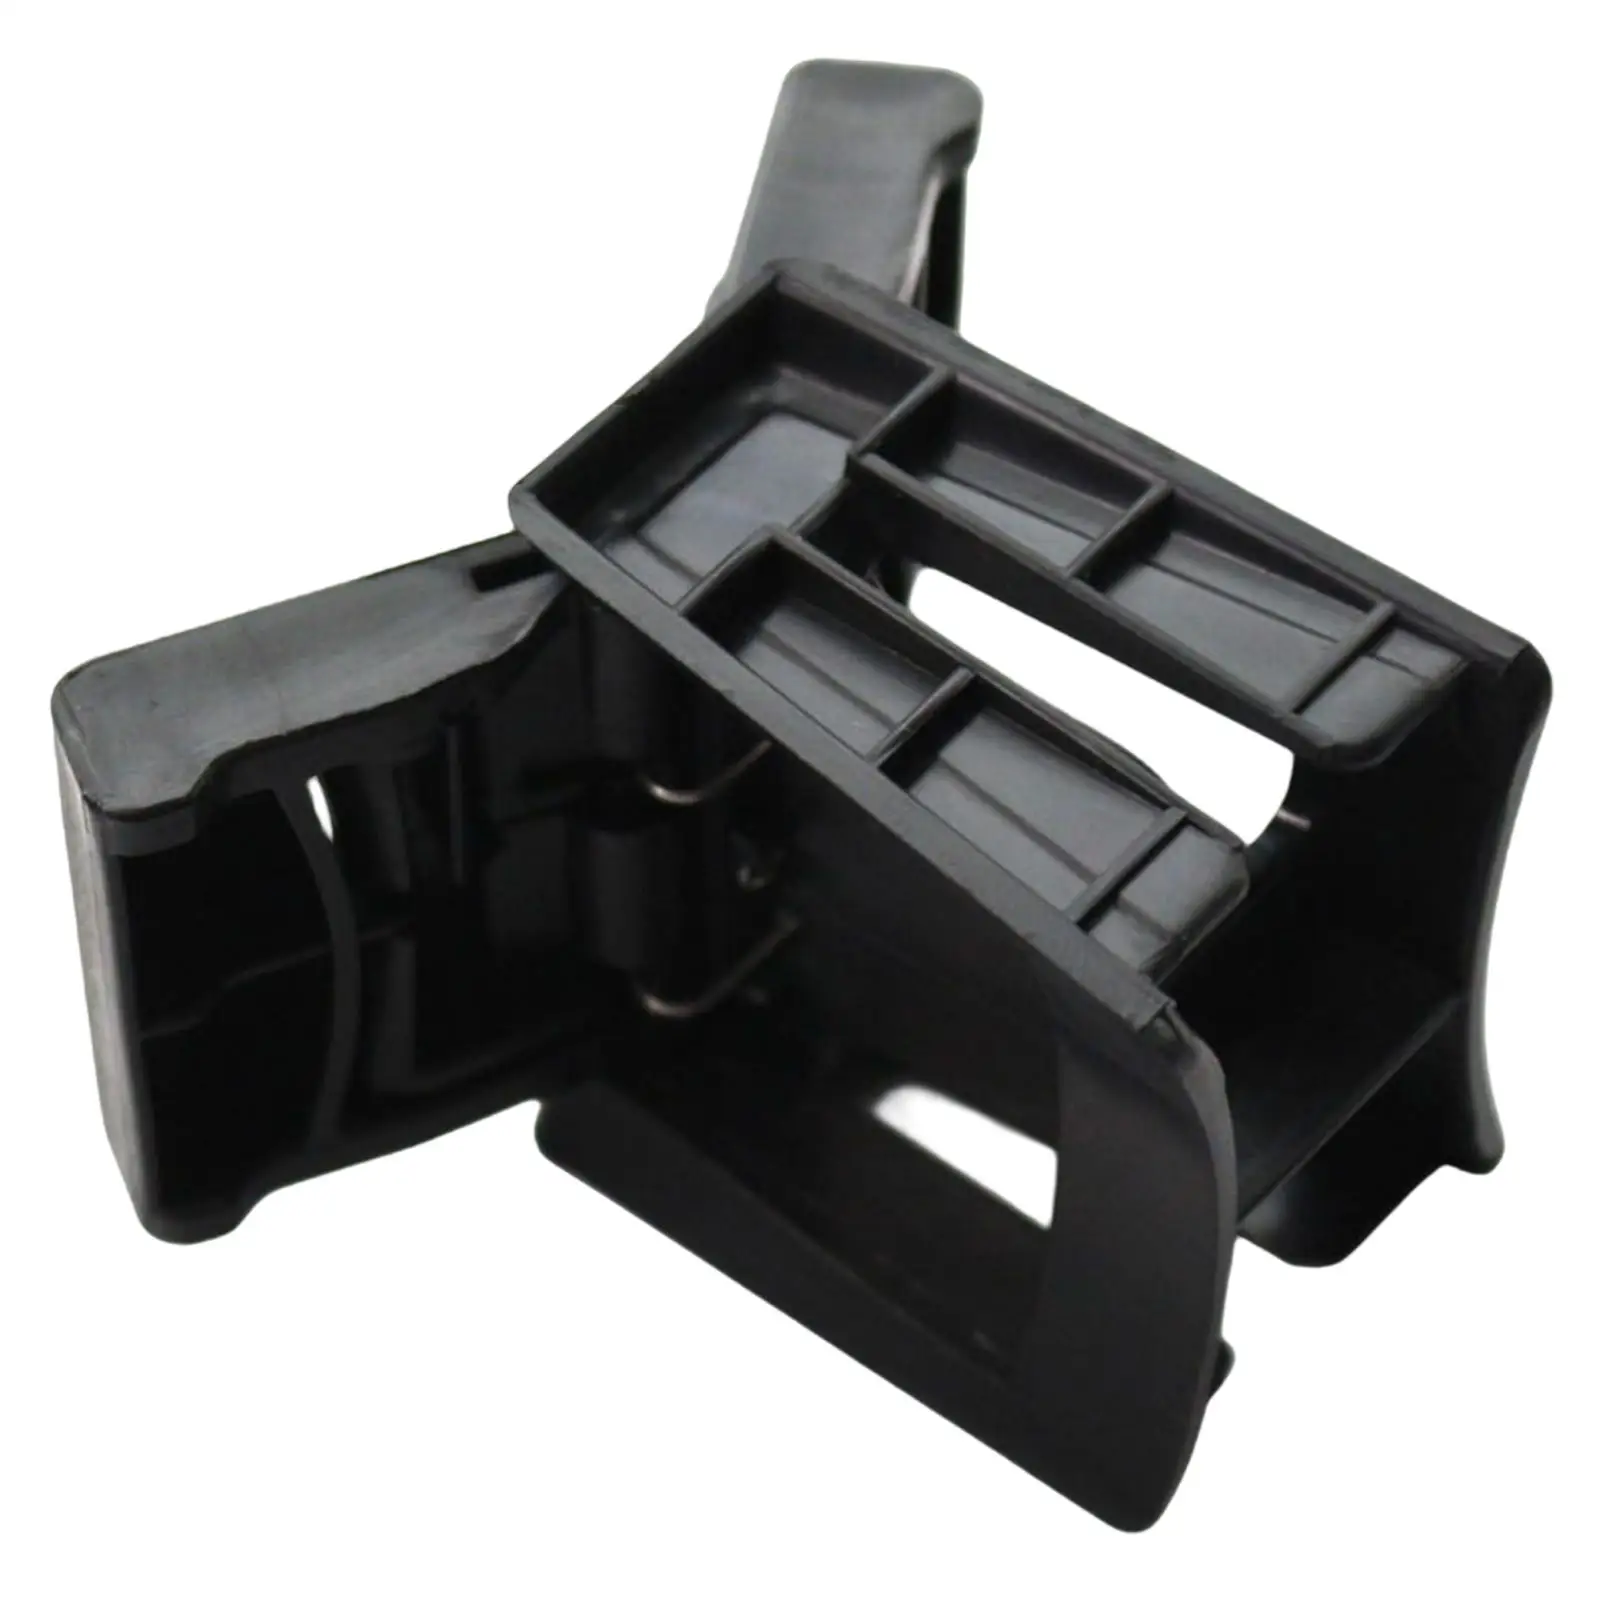 Front Vehicle Water Cup Holder Organizer Interior Drink Stand Insert Insert for 2014 55618-0-C0